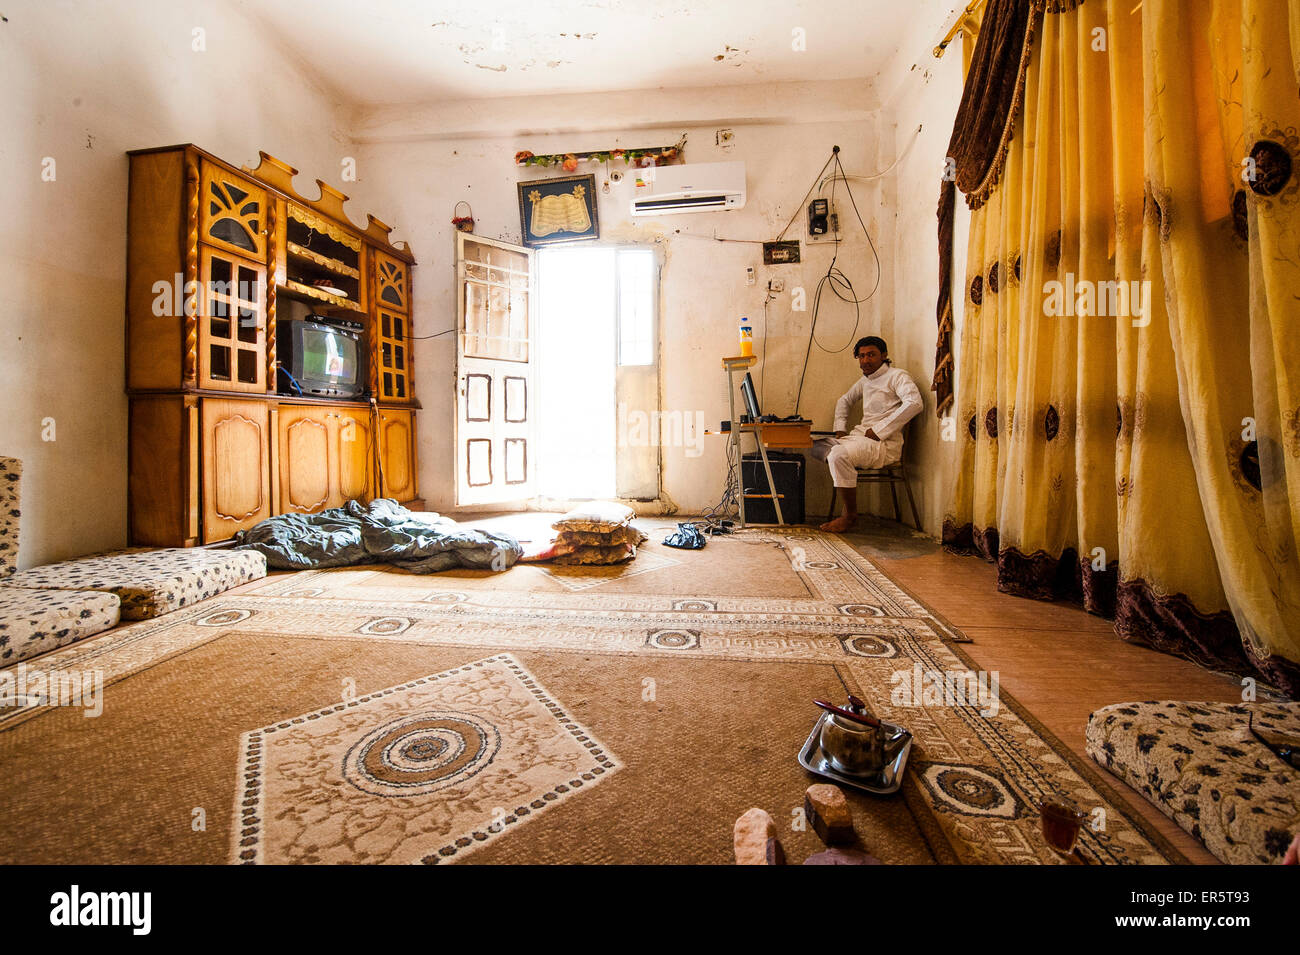 Room of a Bedouin family, Wadi Rum, Jordan, Middle East Stock Photo